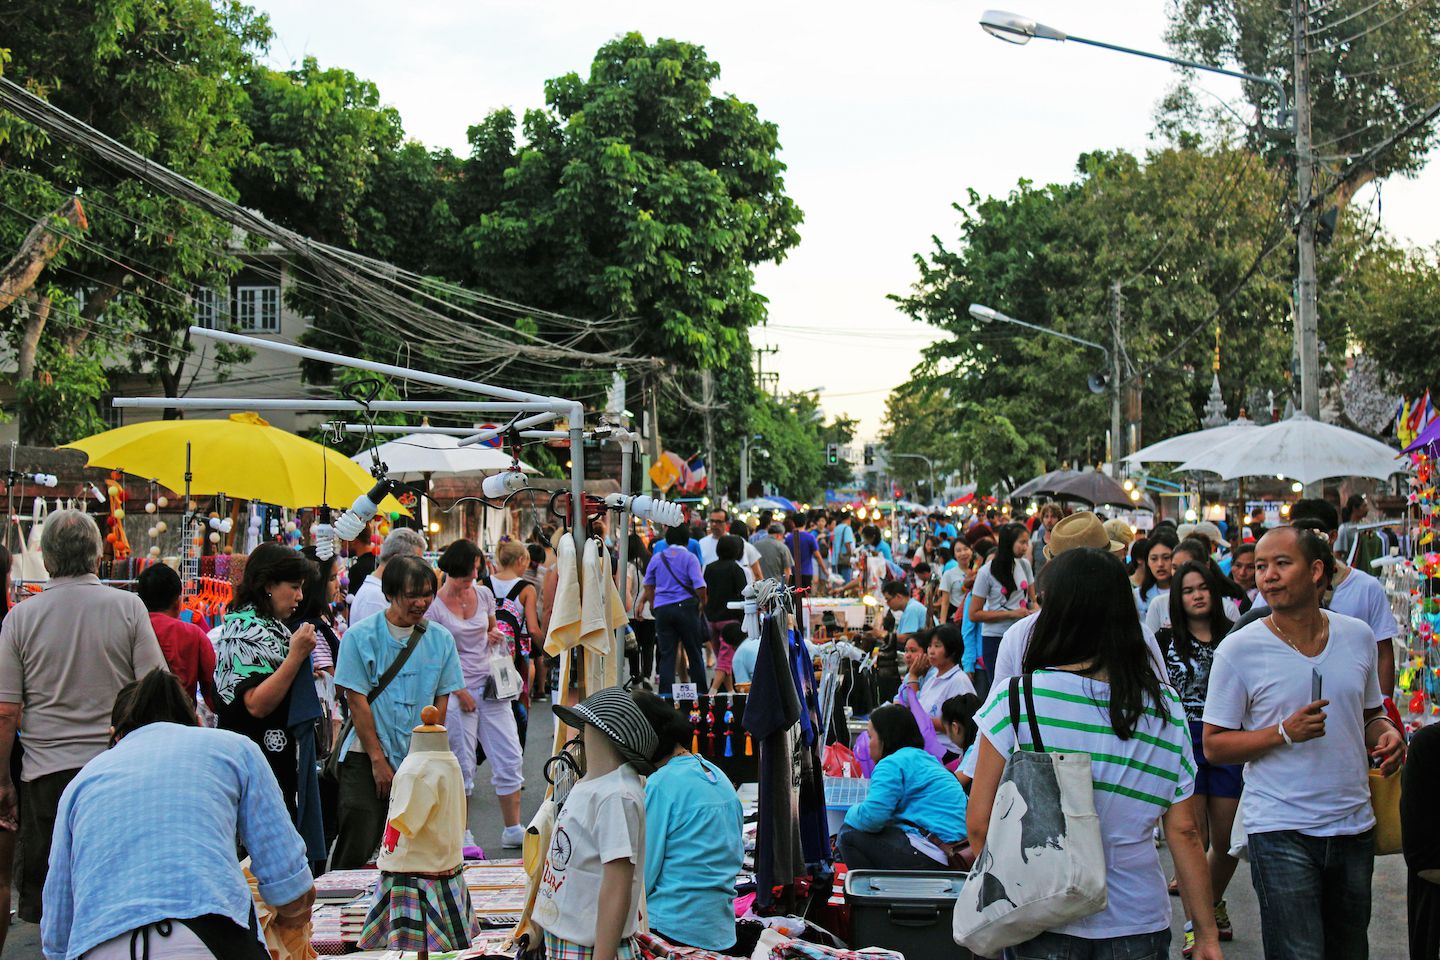 The Sunday Market in Chiang Mai had everything from food to clothes and souvenirs